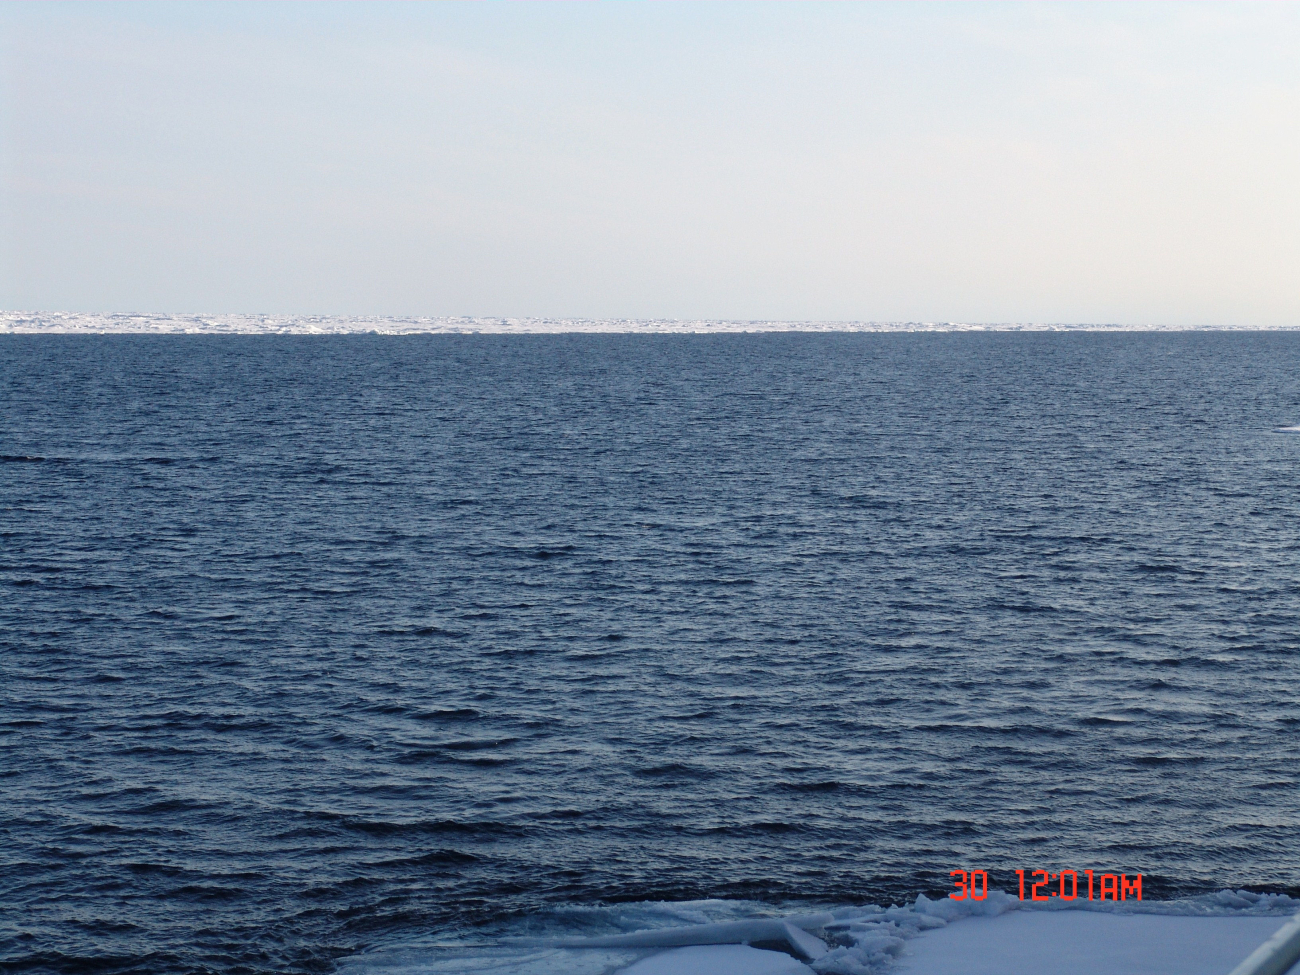 A large area of open water with unbroken ice pack in the distance